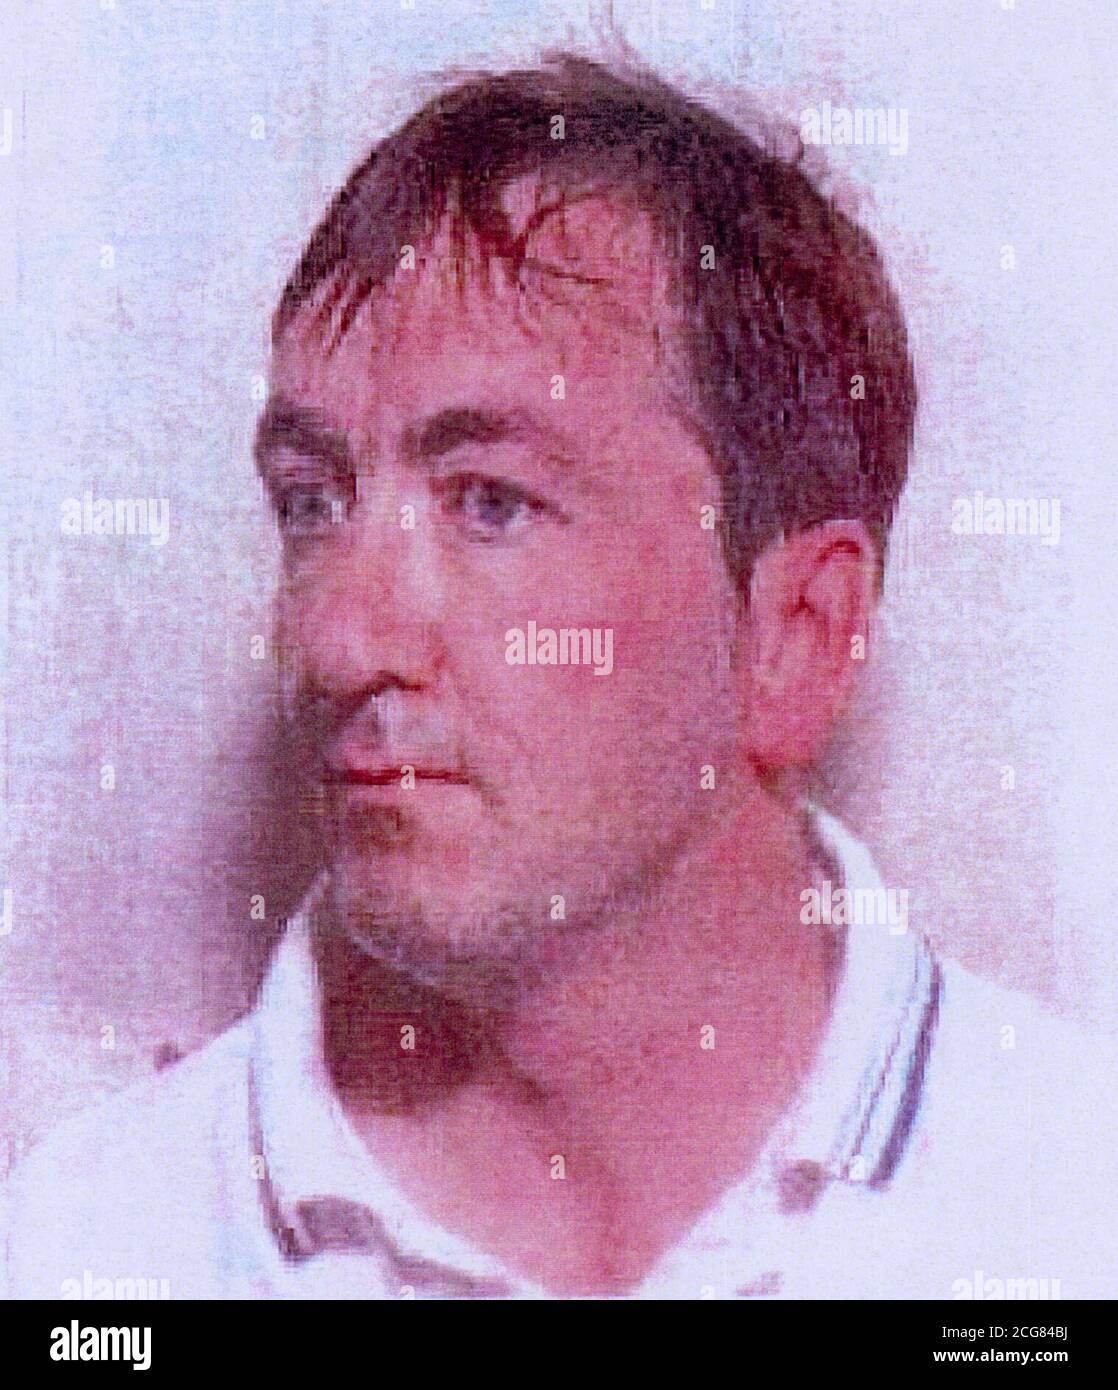 Strathclyde Police collect photo of Willliam McInnes. Police have issued an appeal for help in tracing William McInnes after, Helen McKenzie, 32, from Glasgow, was found dead in the boot of her car, outside a hotel in Blackpool. It is believed Mr McInnes, 45, was a friend of the victim. Stock Photo